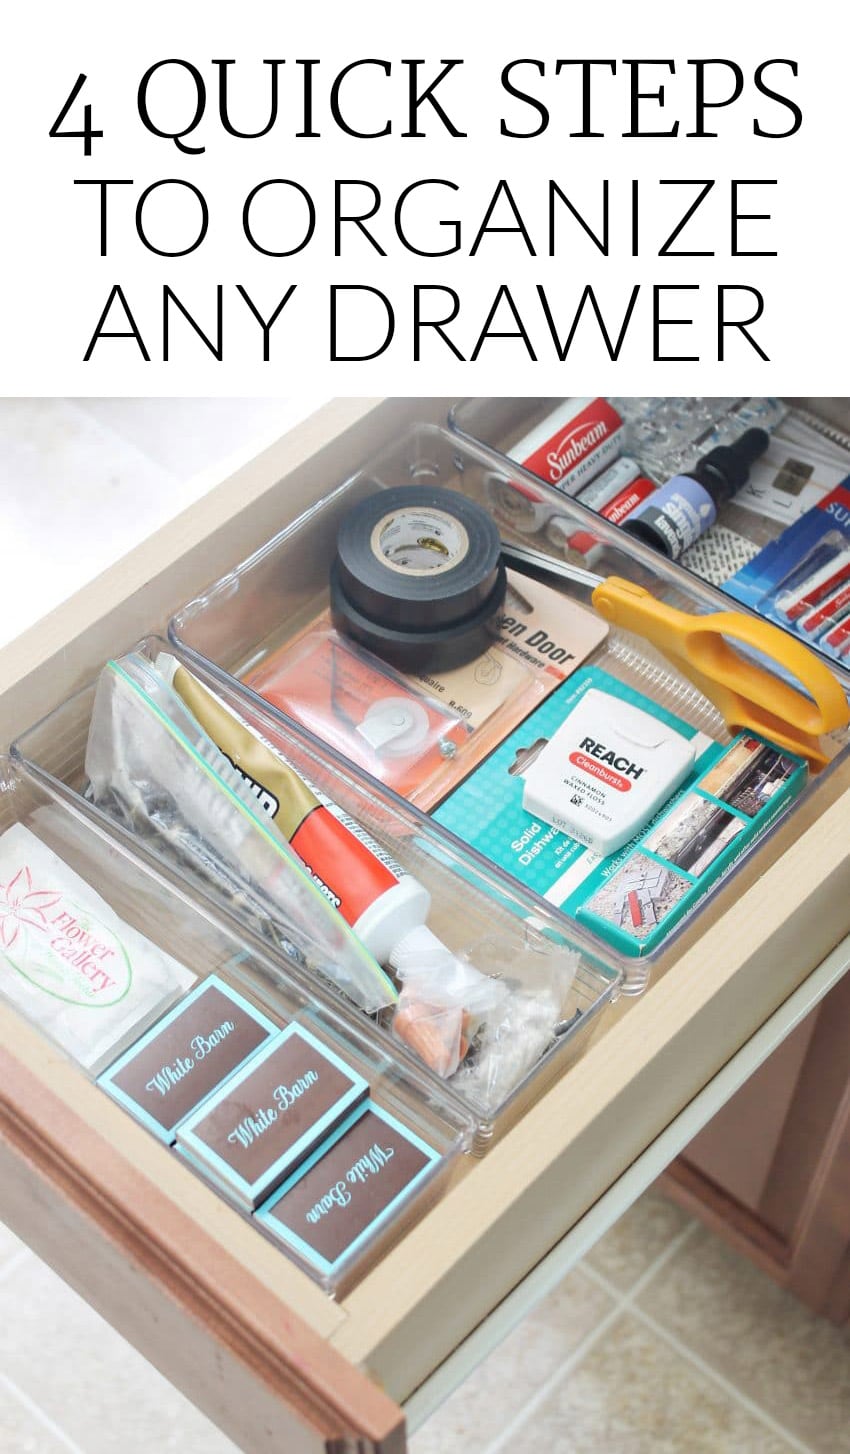 How to Organize the Kitchen Junk Drawer - Polished Habitat